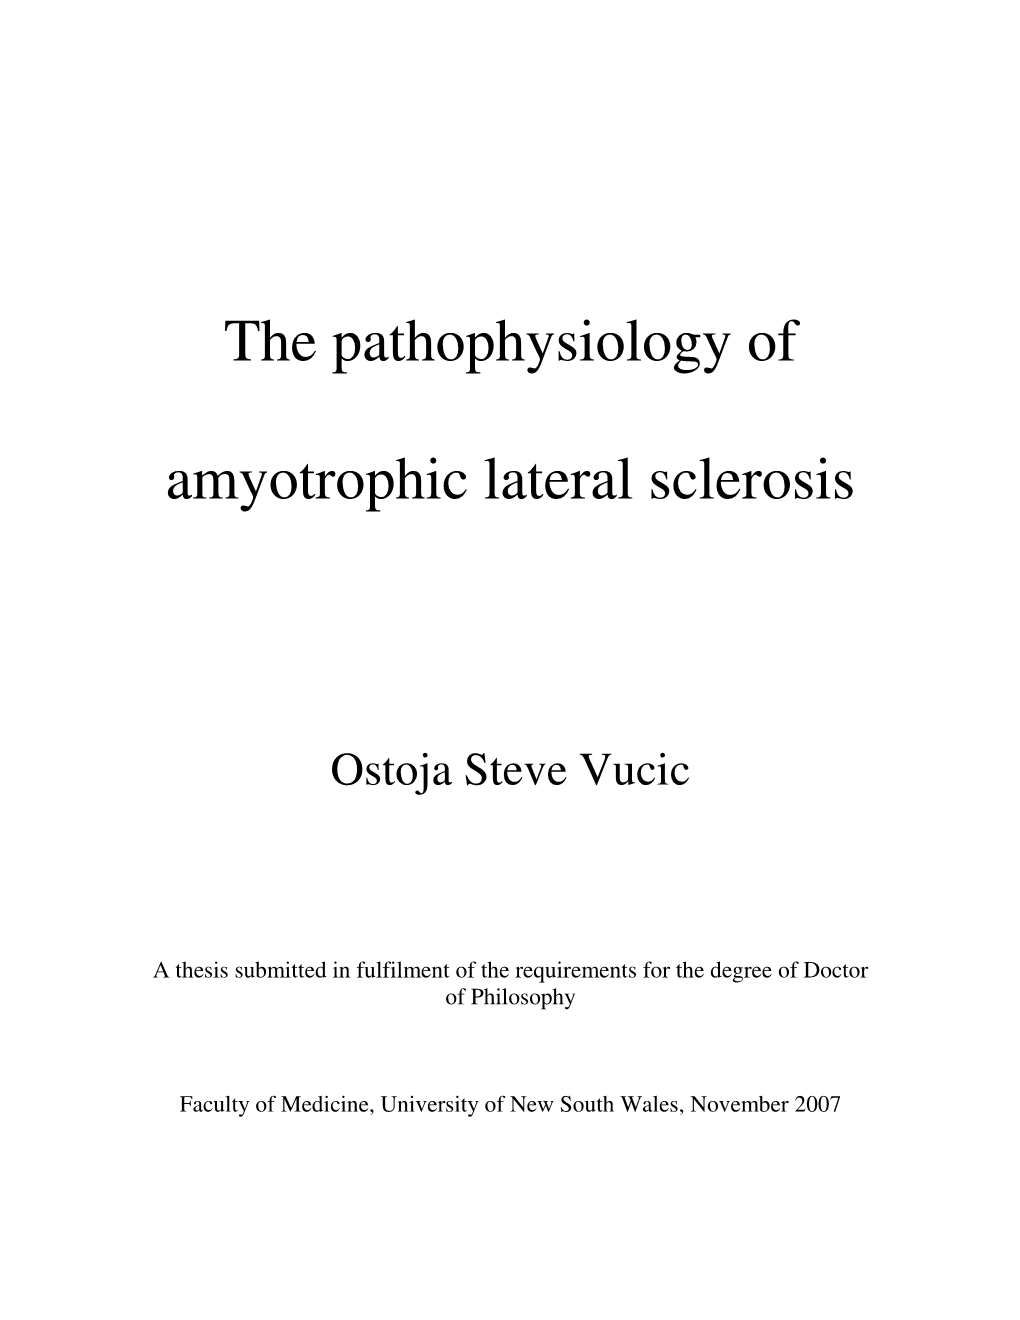 The Pathophysiology of Amyotrophic Lateral Sclerosis